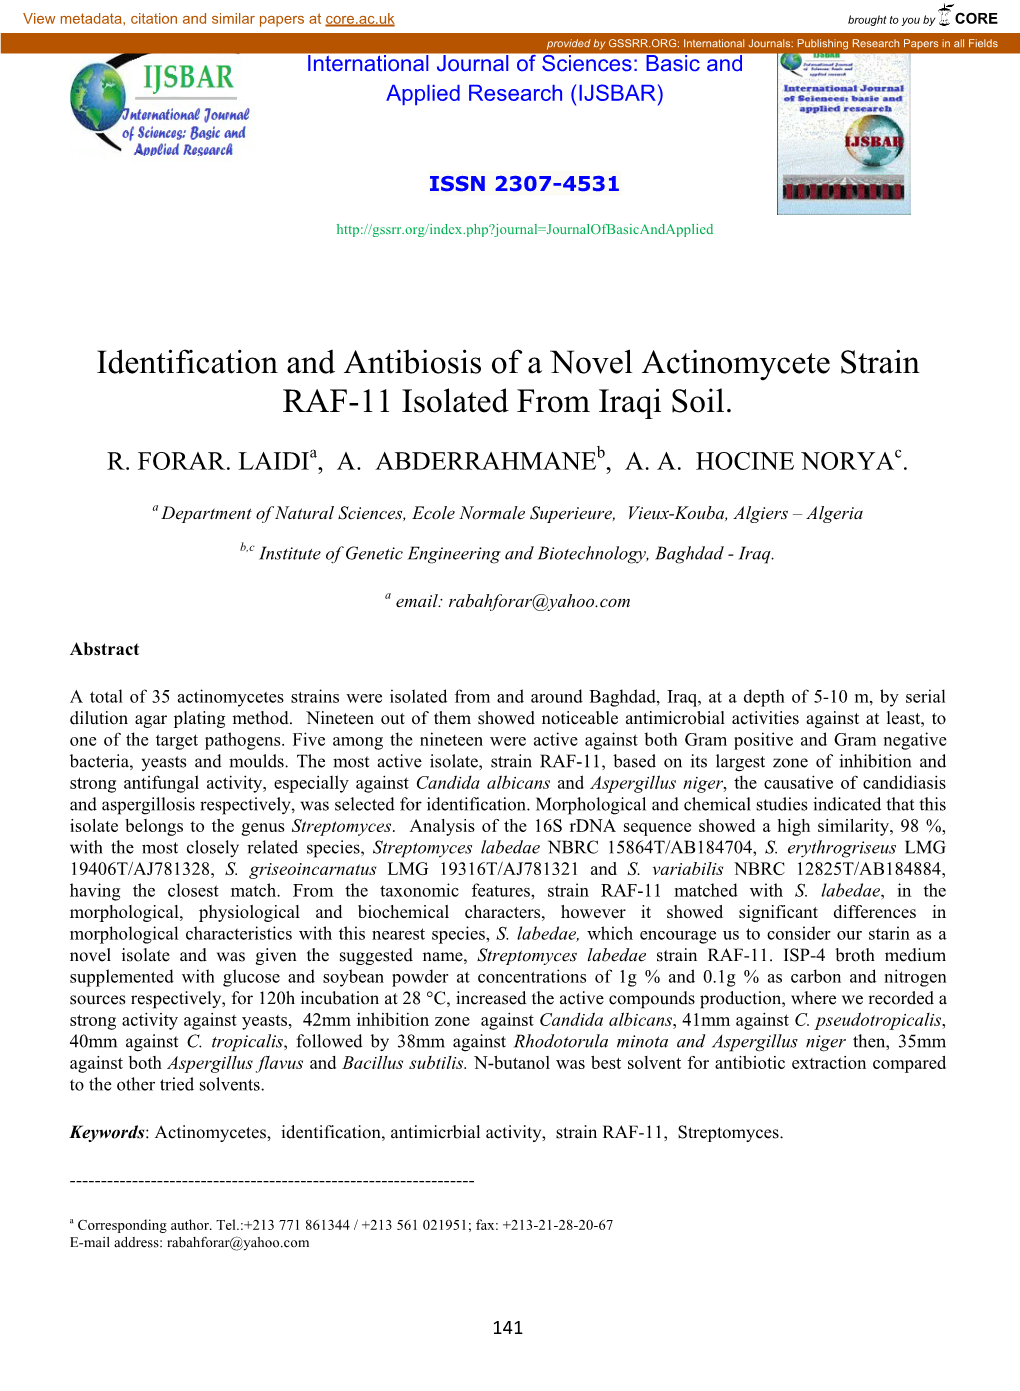 Identification and Antibiosis of a Novel Actinomycete Strain RAF-11 Isolated from Iraqi Soil